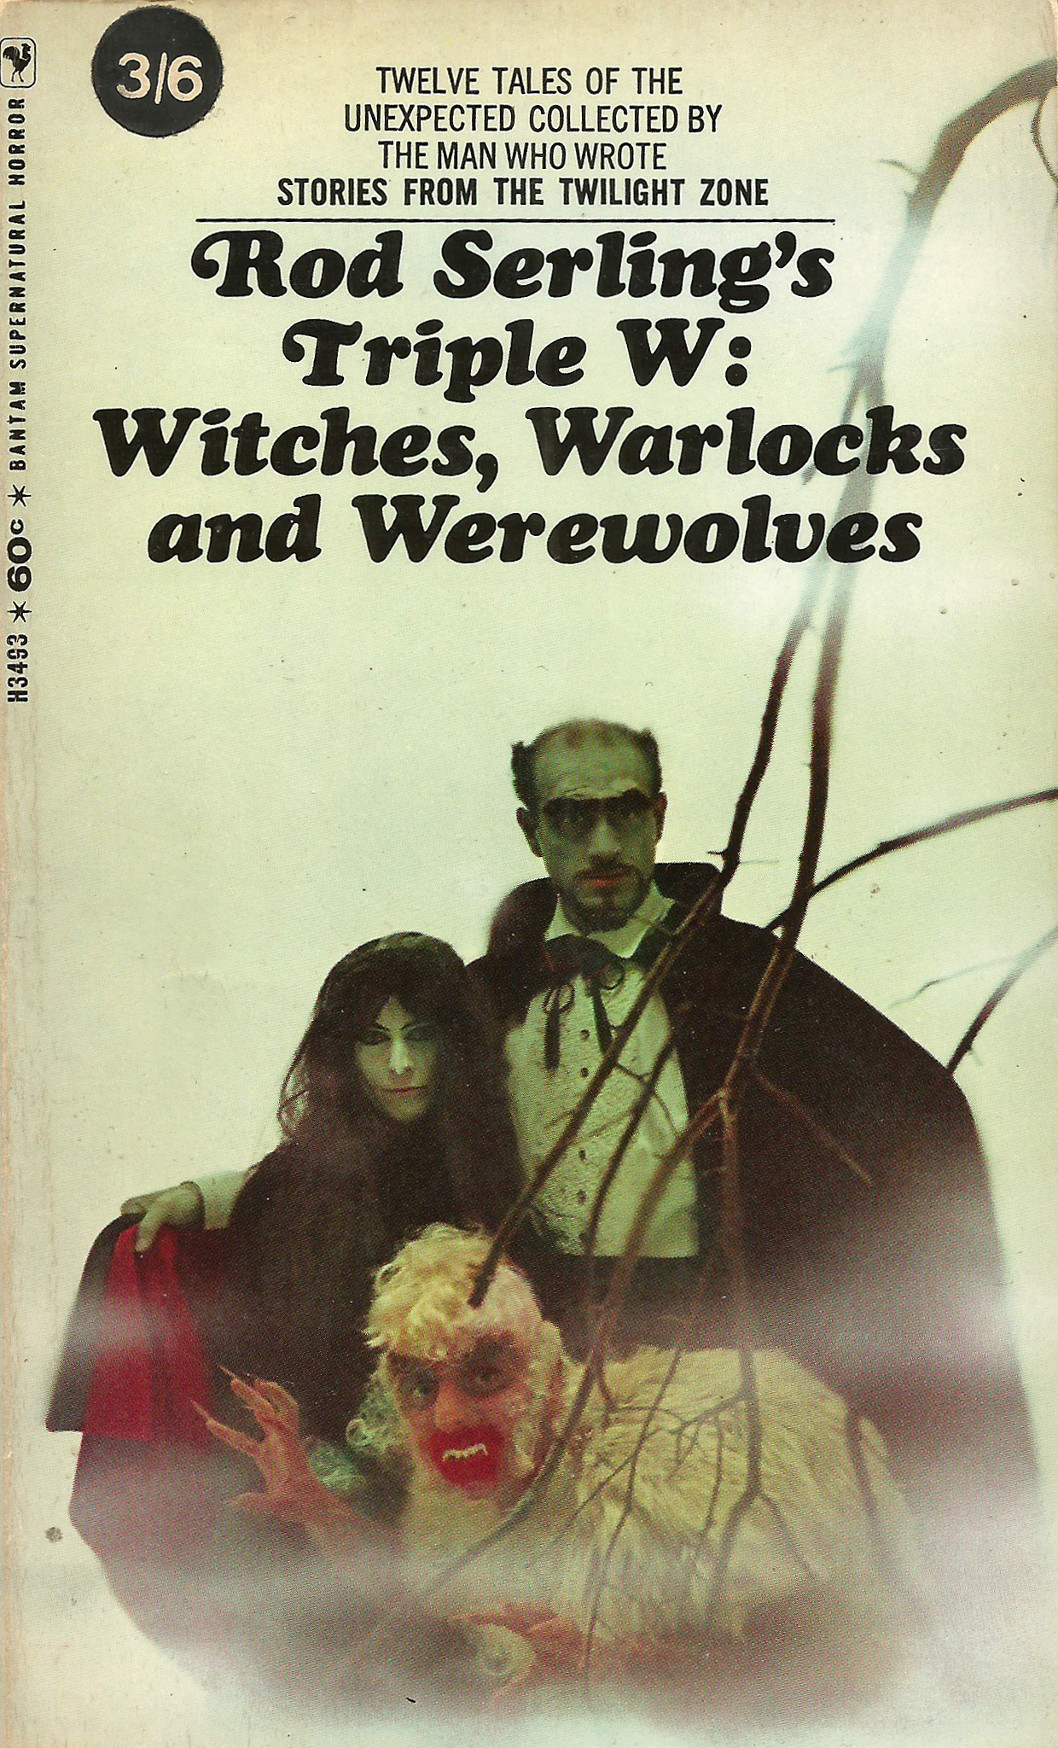 Rod Serling&rsquo;s Triple W: Witches, Warlocks and Werewolves (Bantam, 1967).From